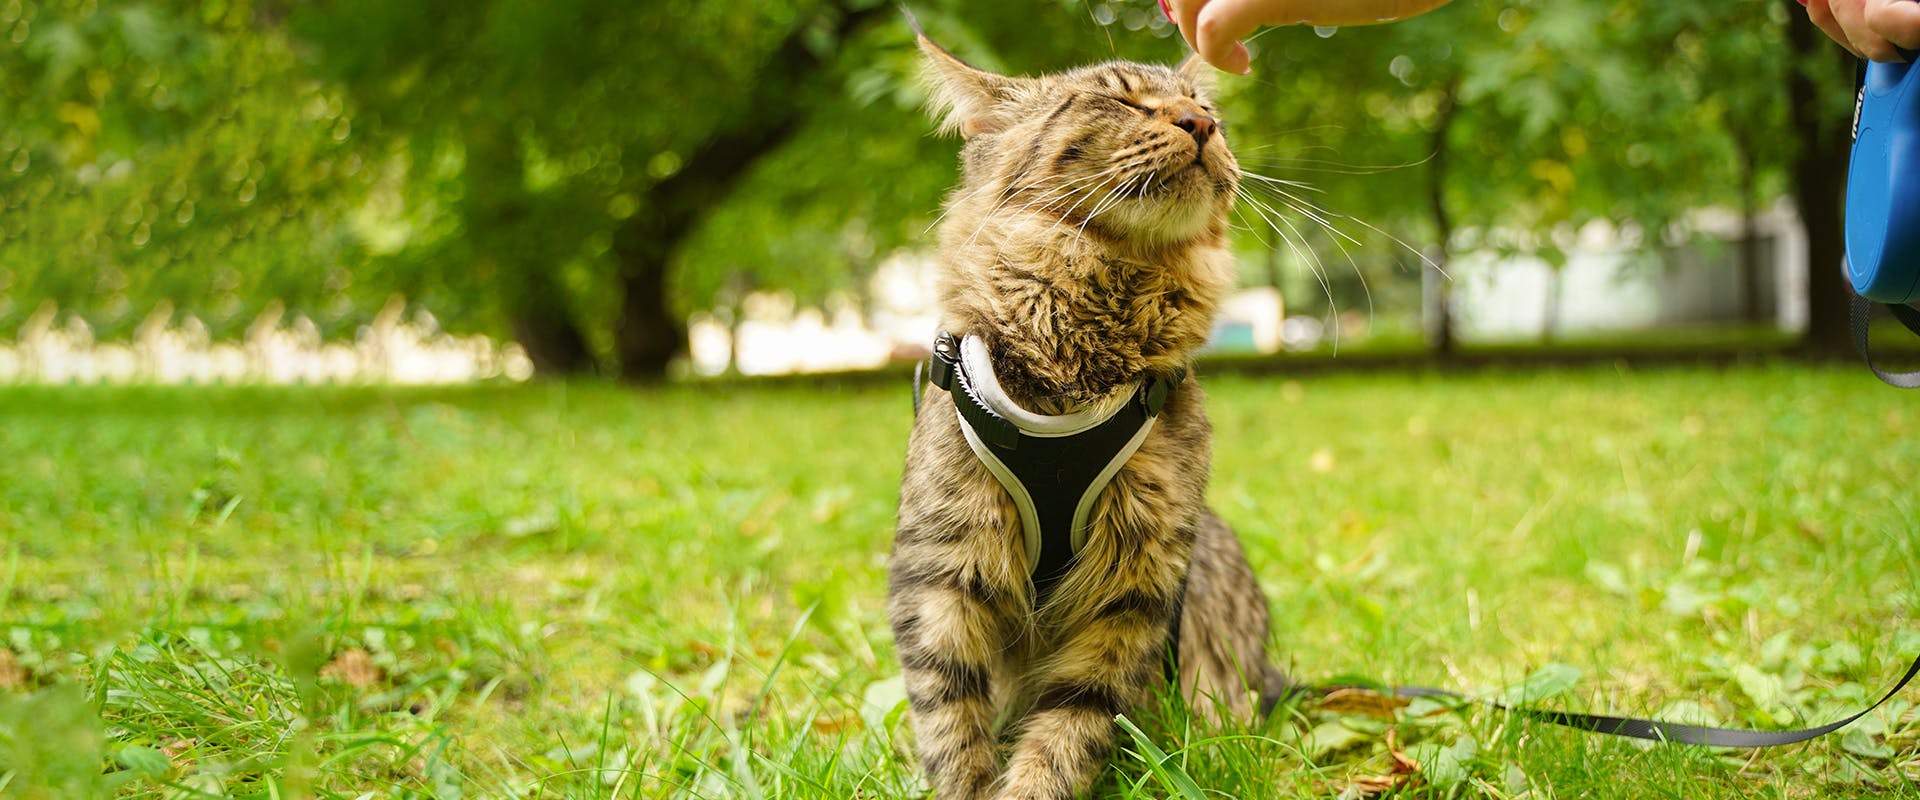 A fluffy cat standing in the middle of a park, wearing a black and white cat harness